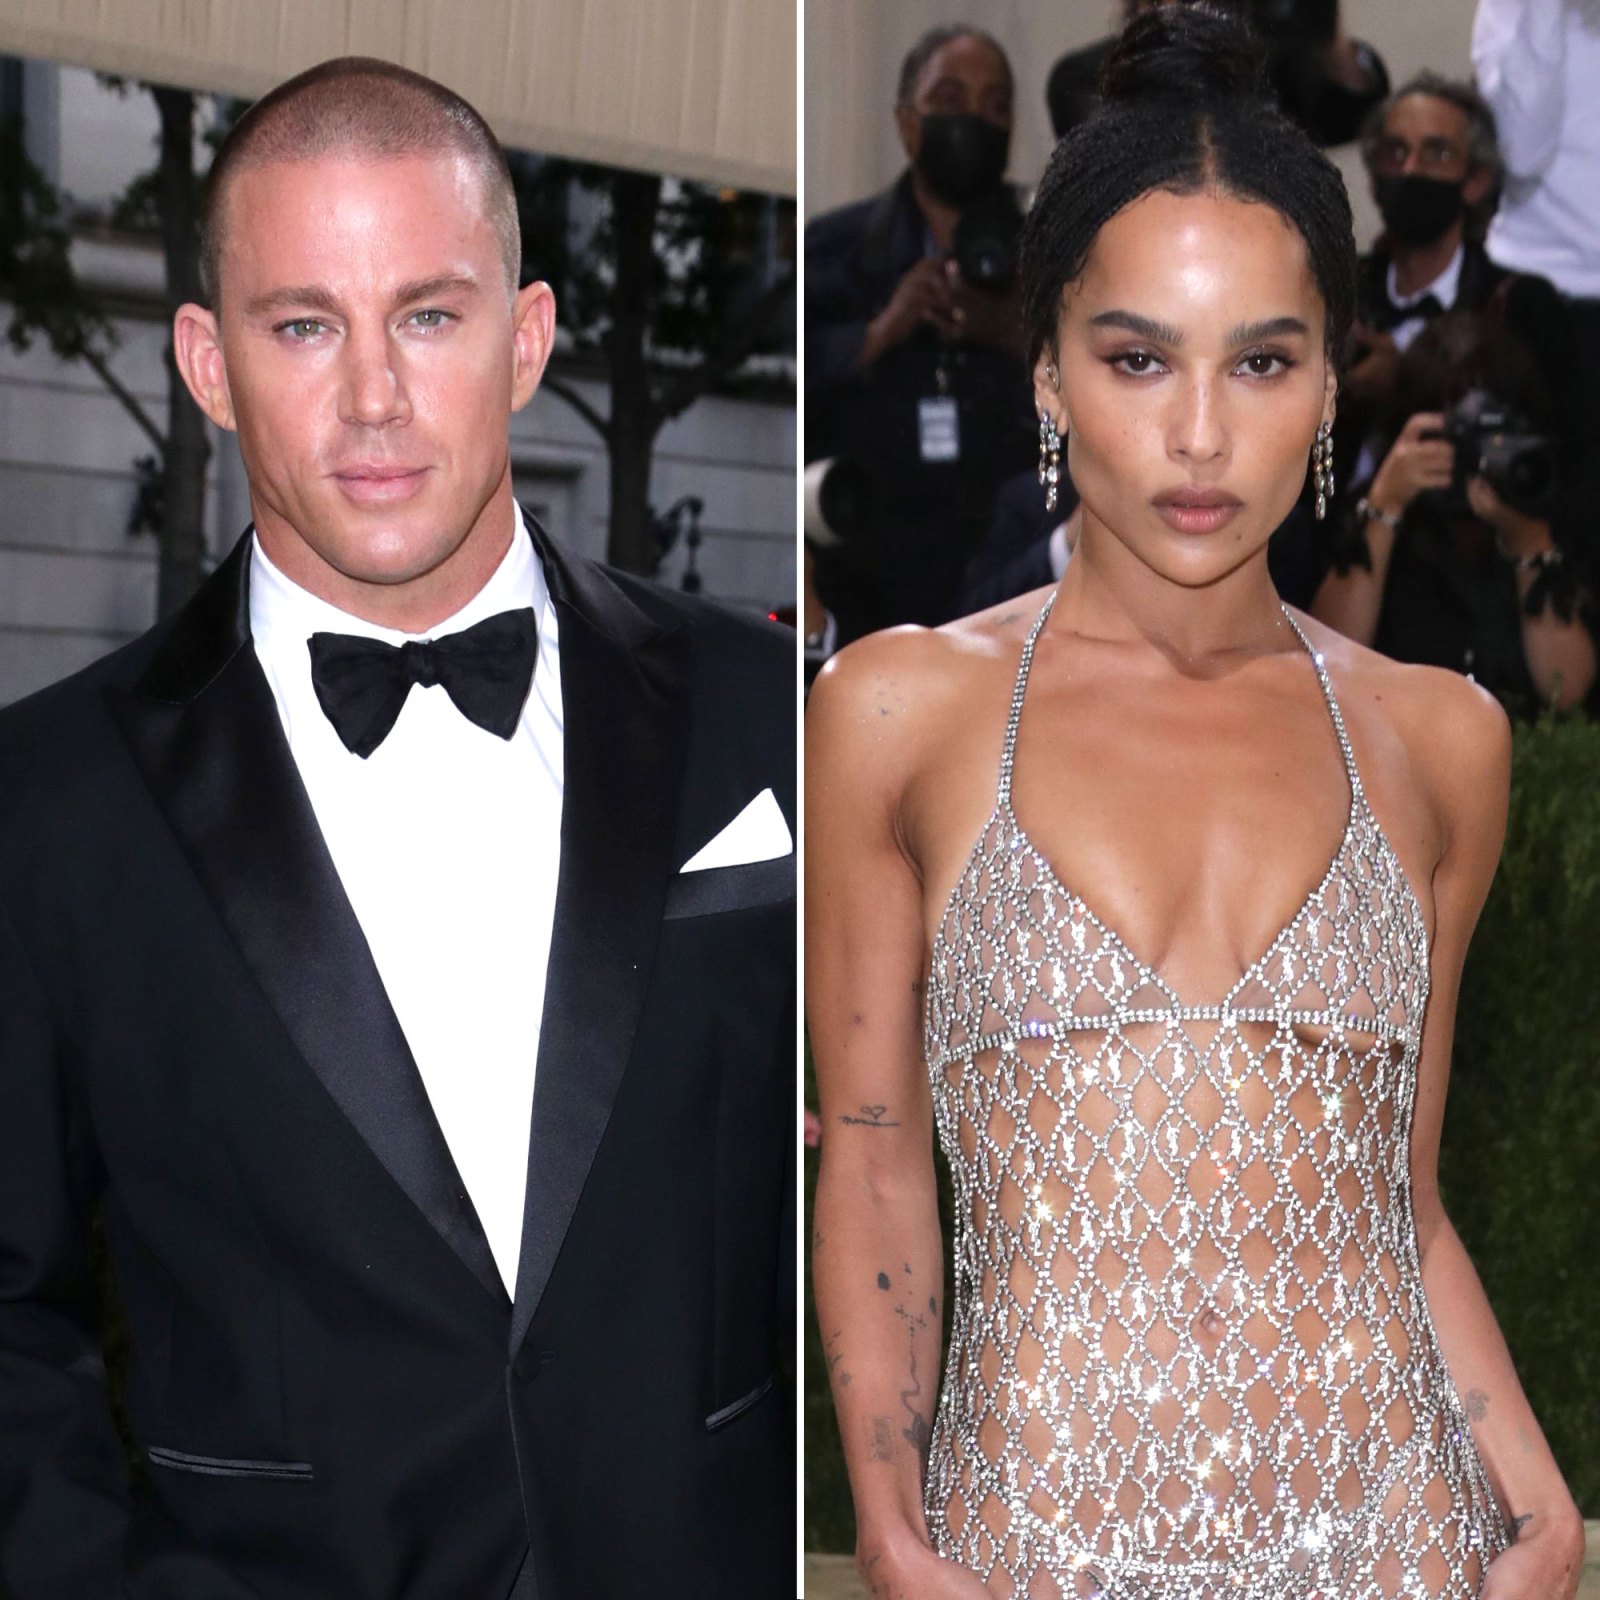 Channing Tatum and Zoe Kravitz Step Out at 2021 Met Gala Solo